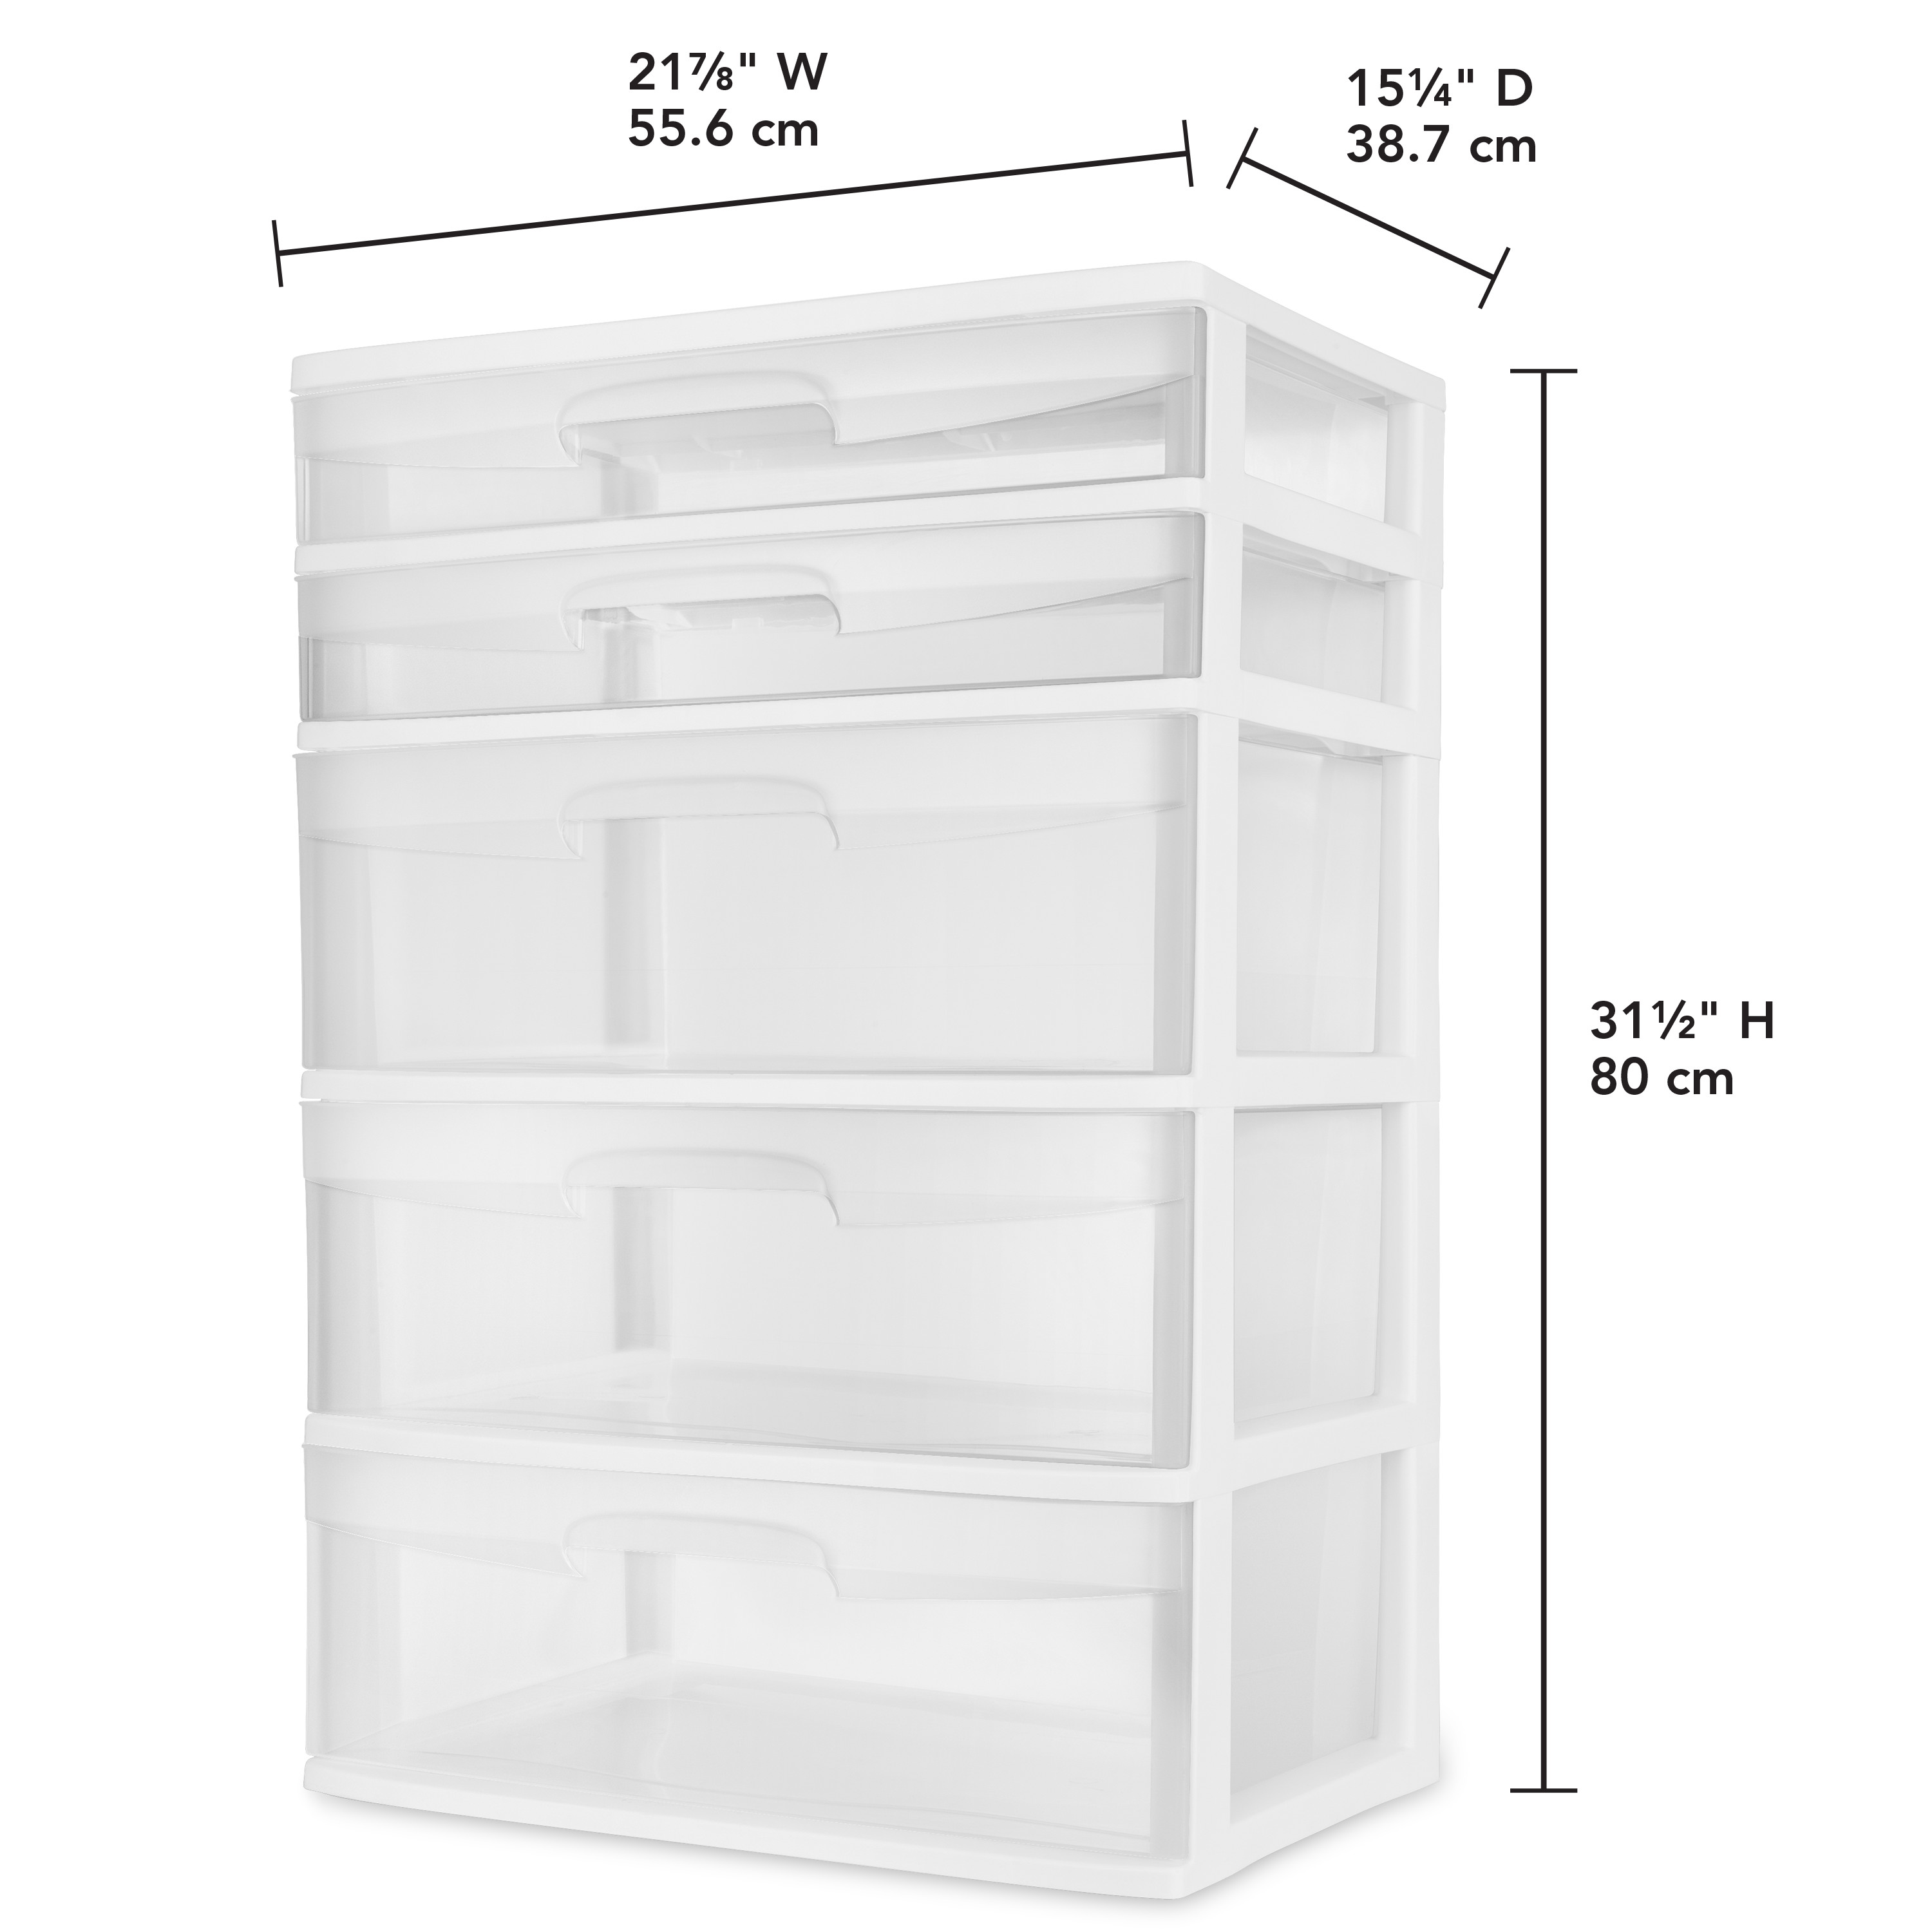 Sterilite Plastic 5 Drawer Wide Tower White - image 2 of 6